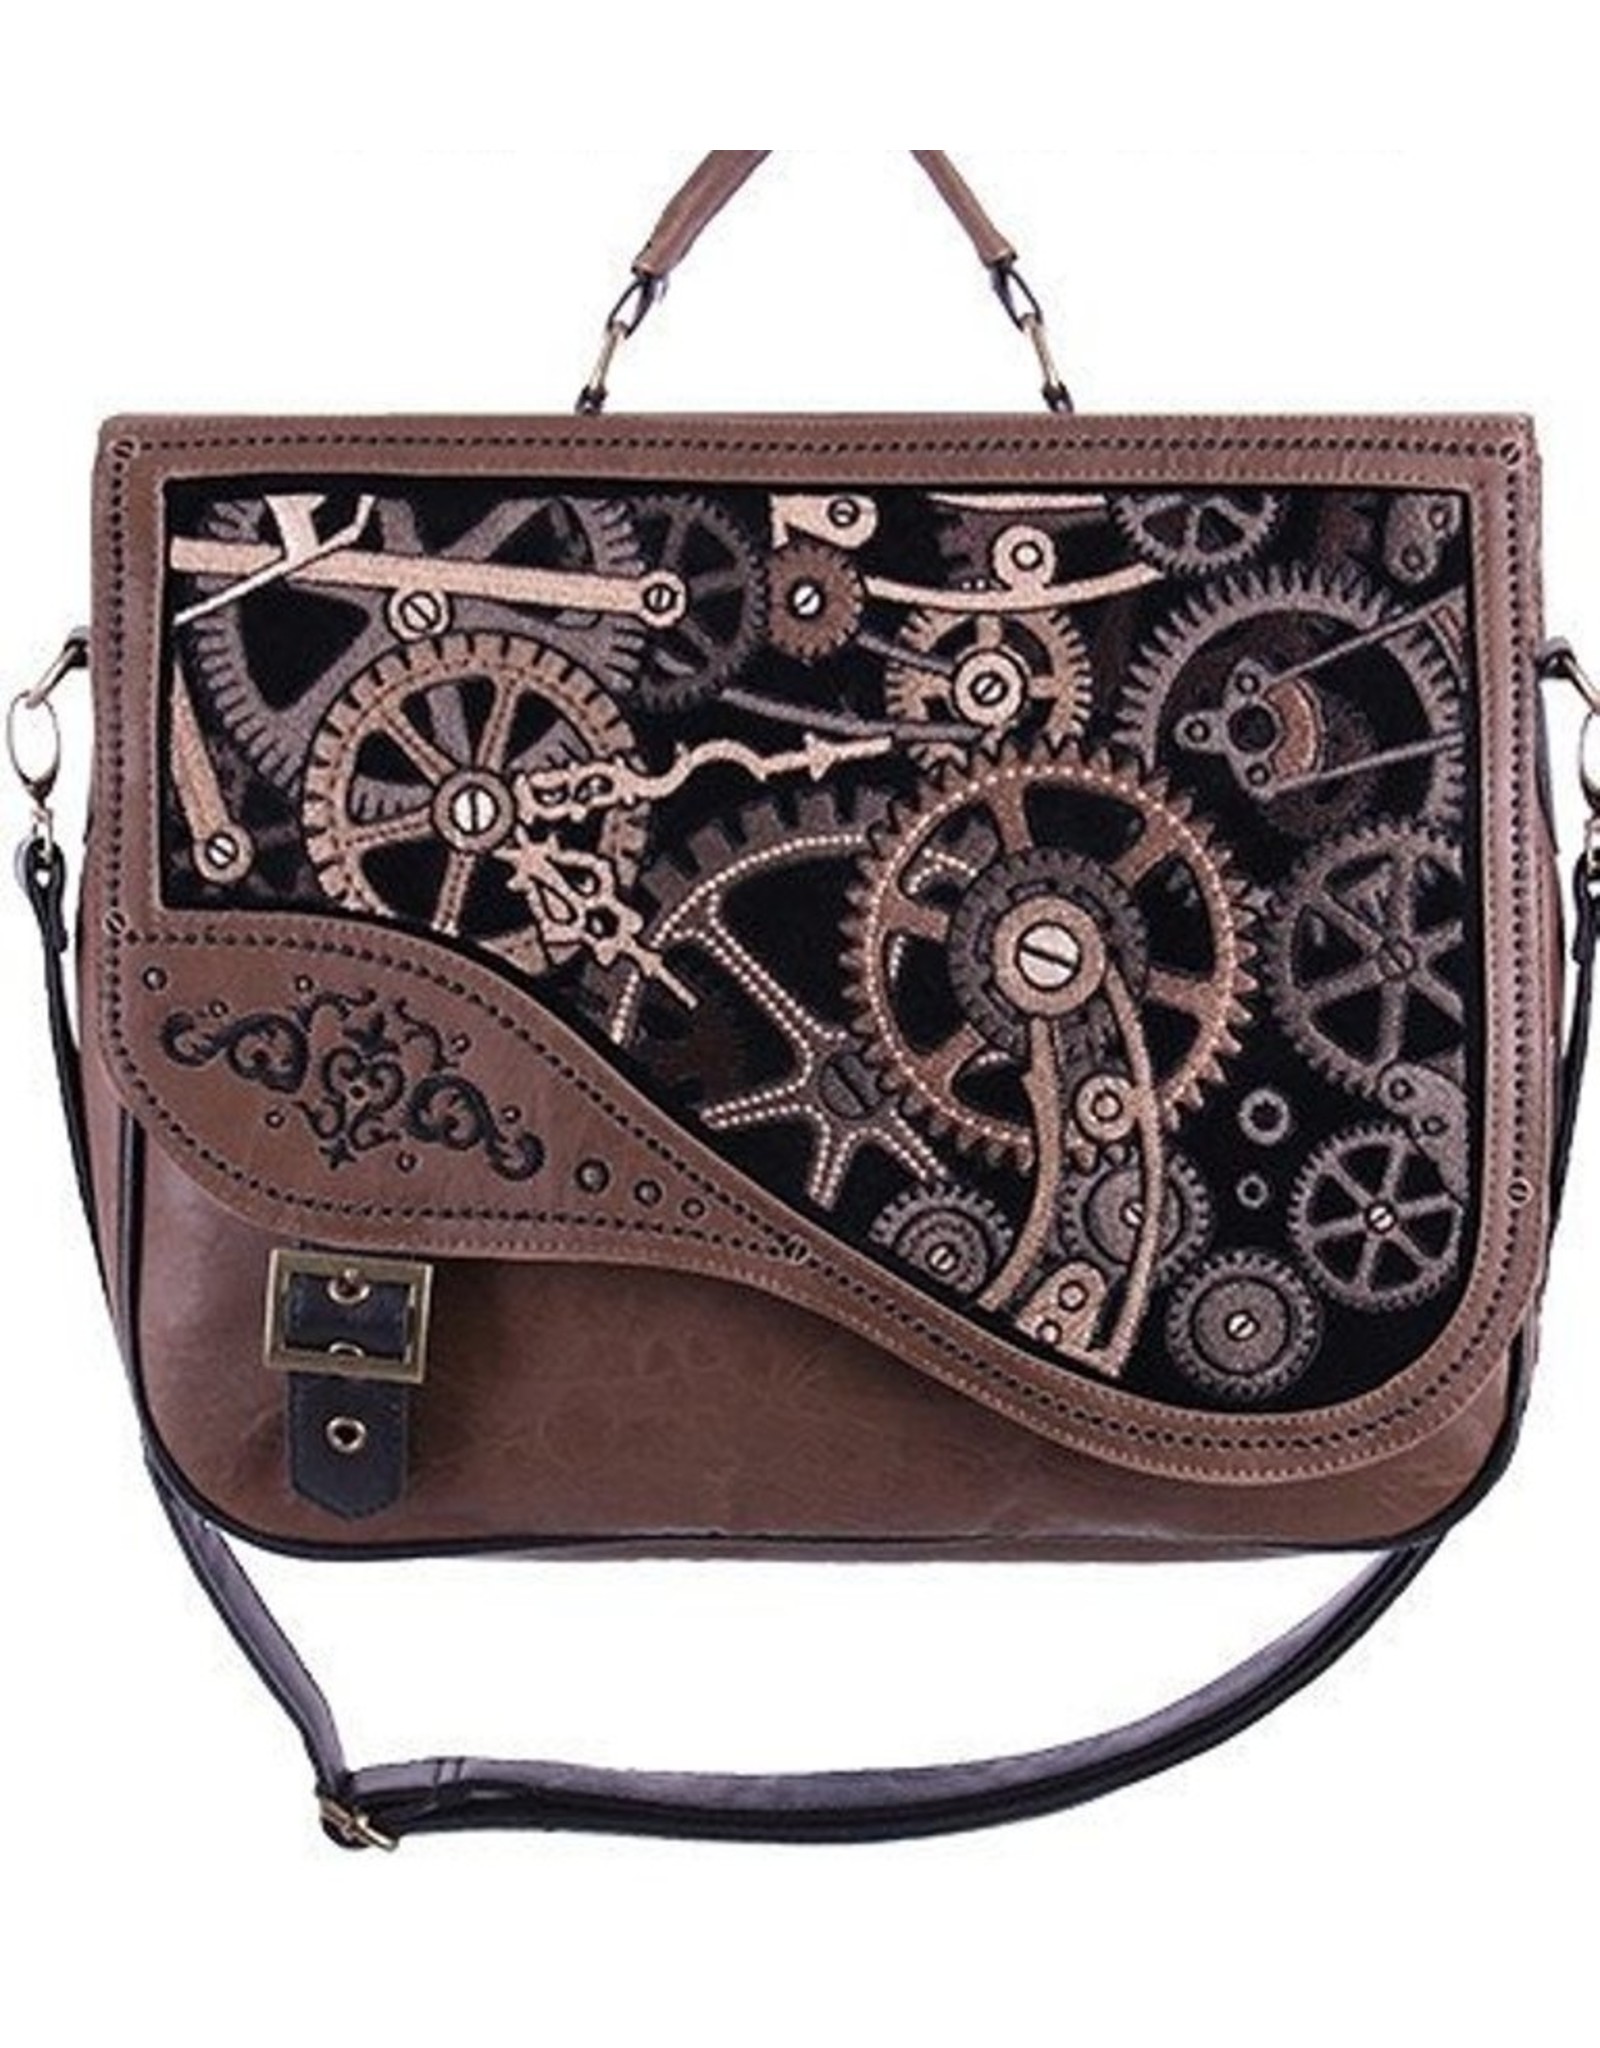 Restyle Gothic bags Steampunk bags - Restyle Steampunk satchel bag Brown Mechanism